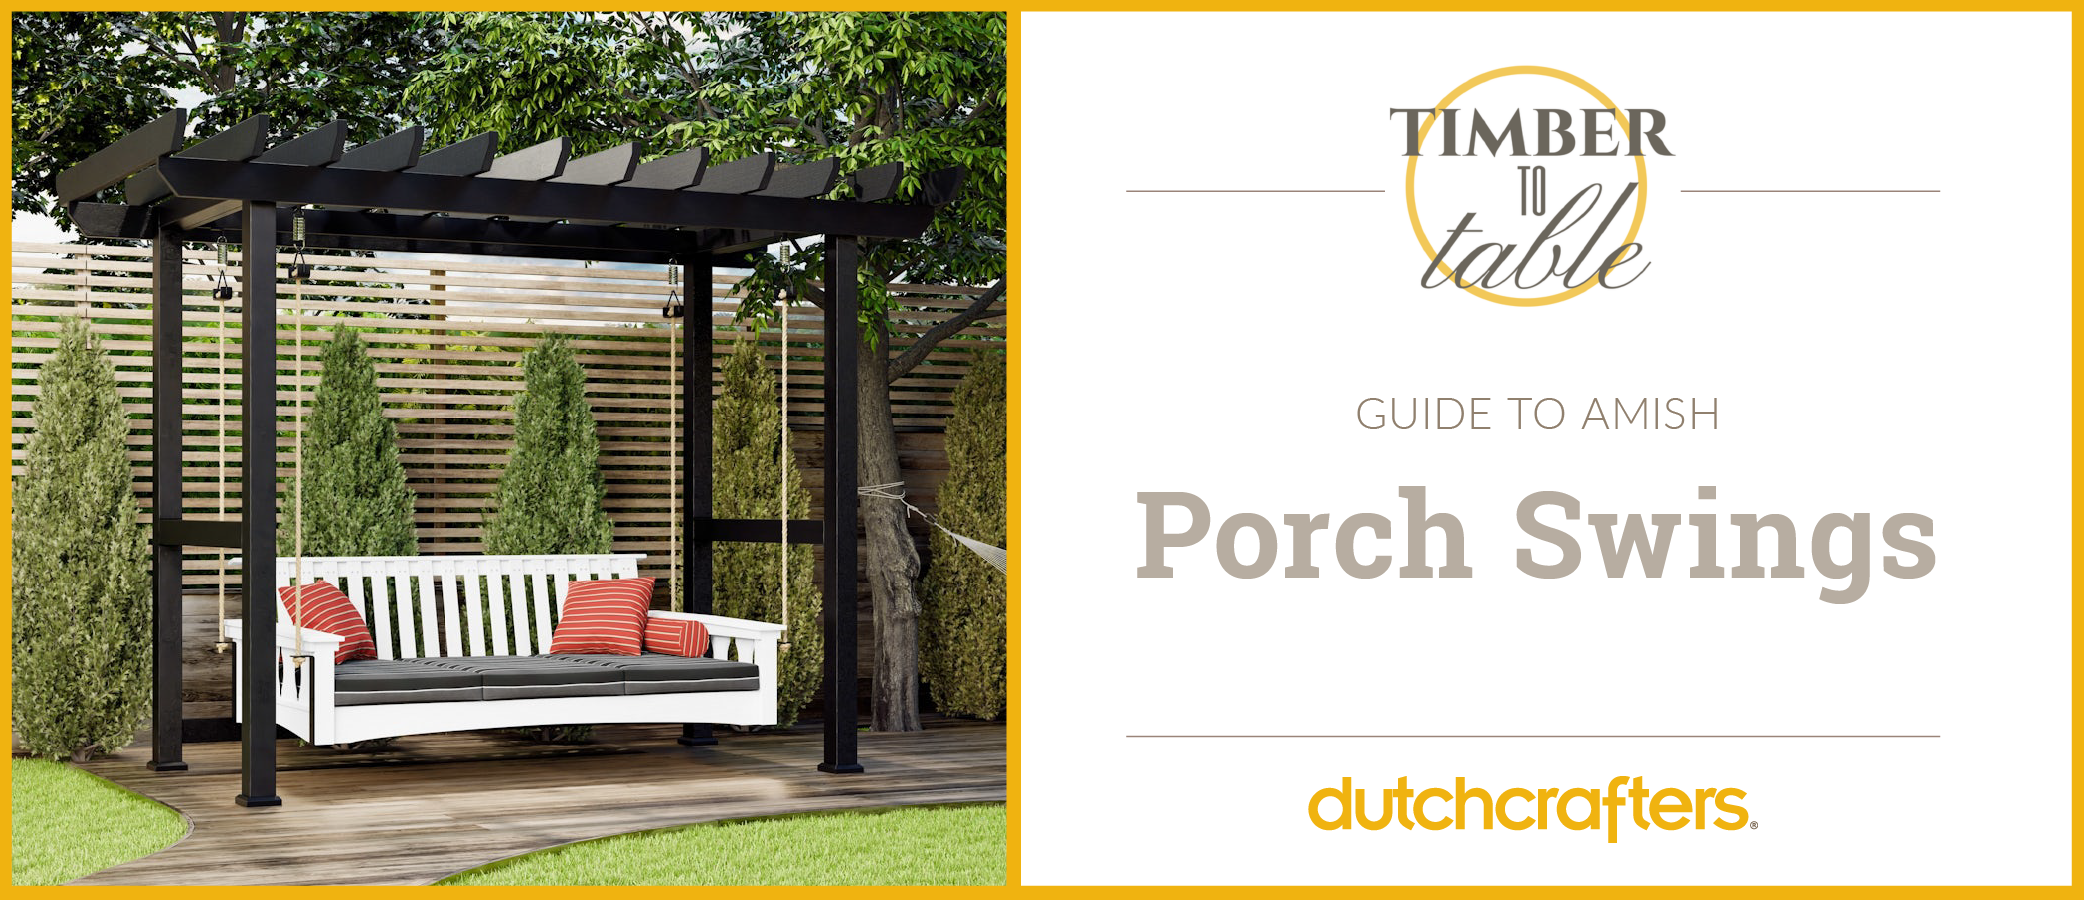 Guide to Amish Porch Swings